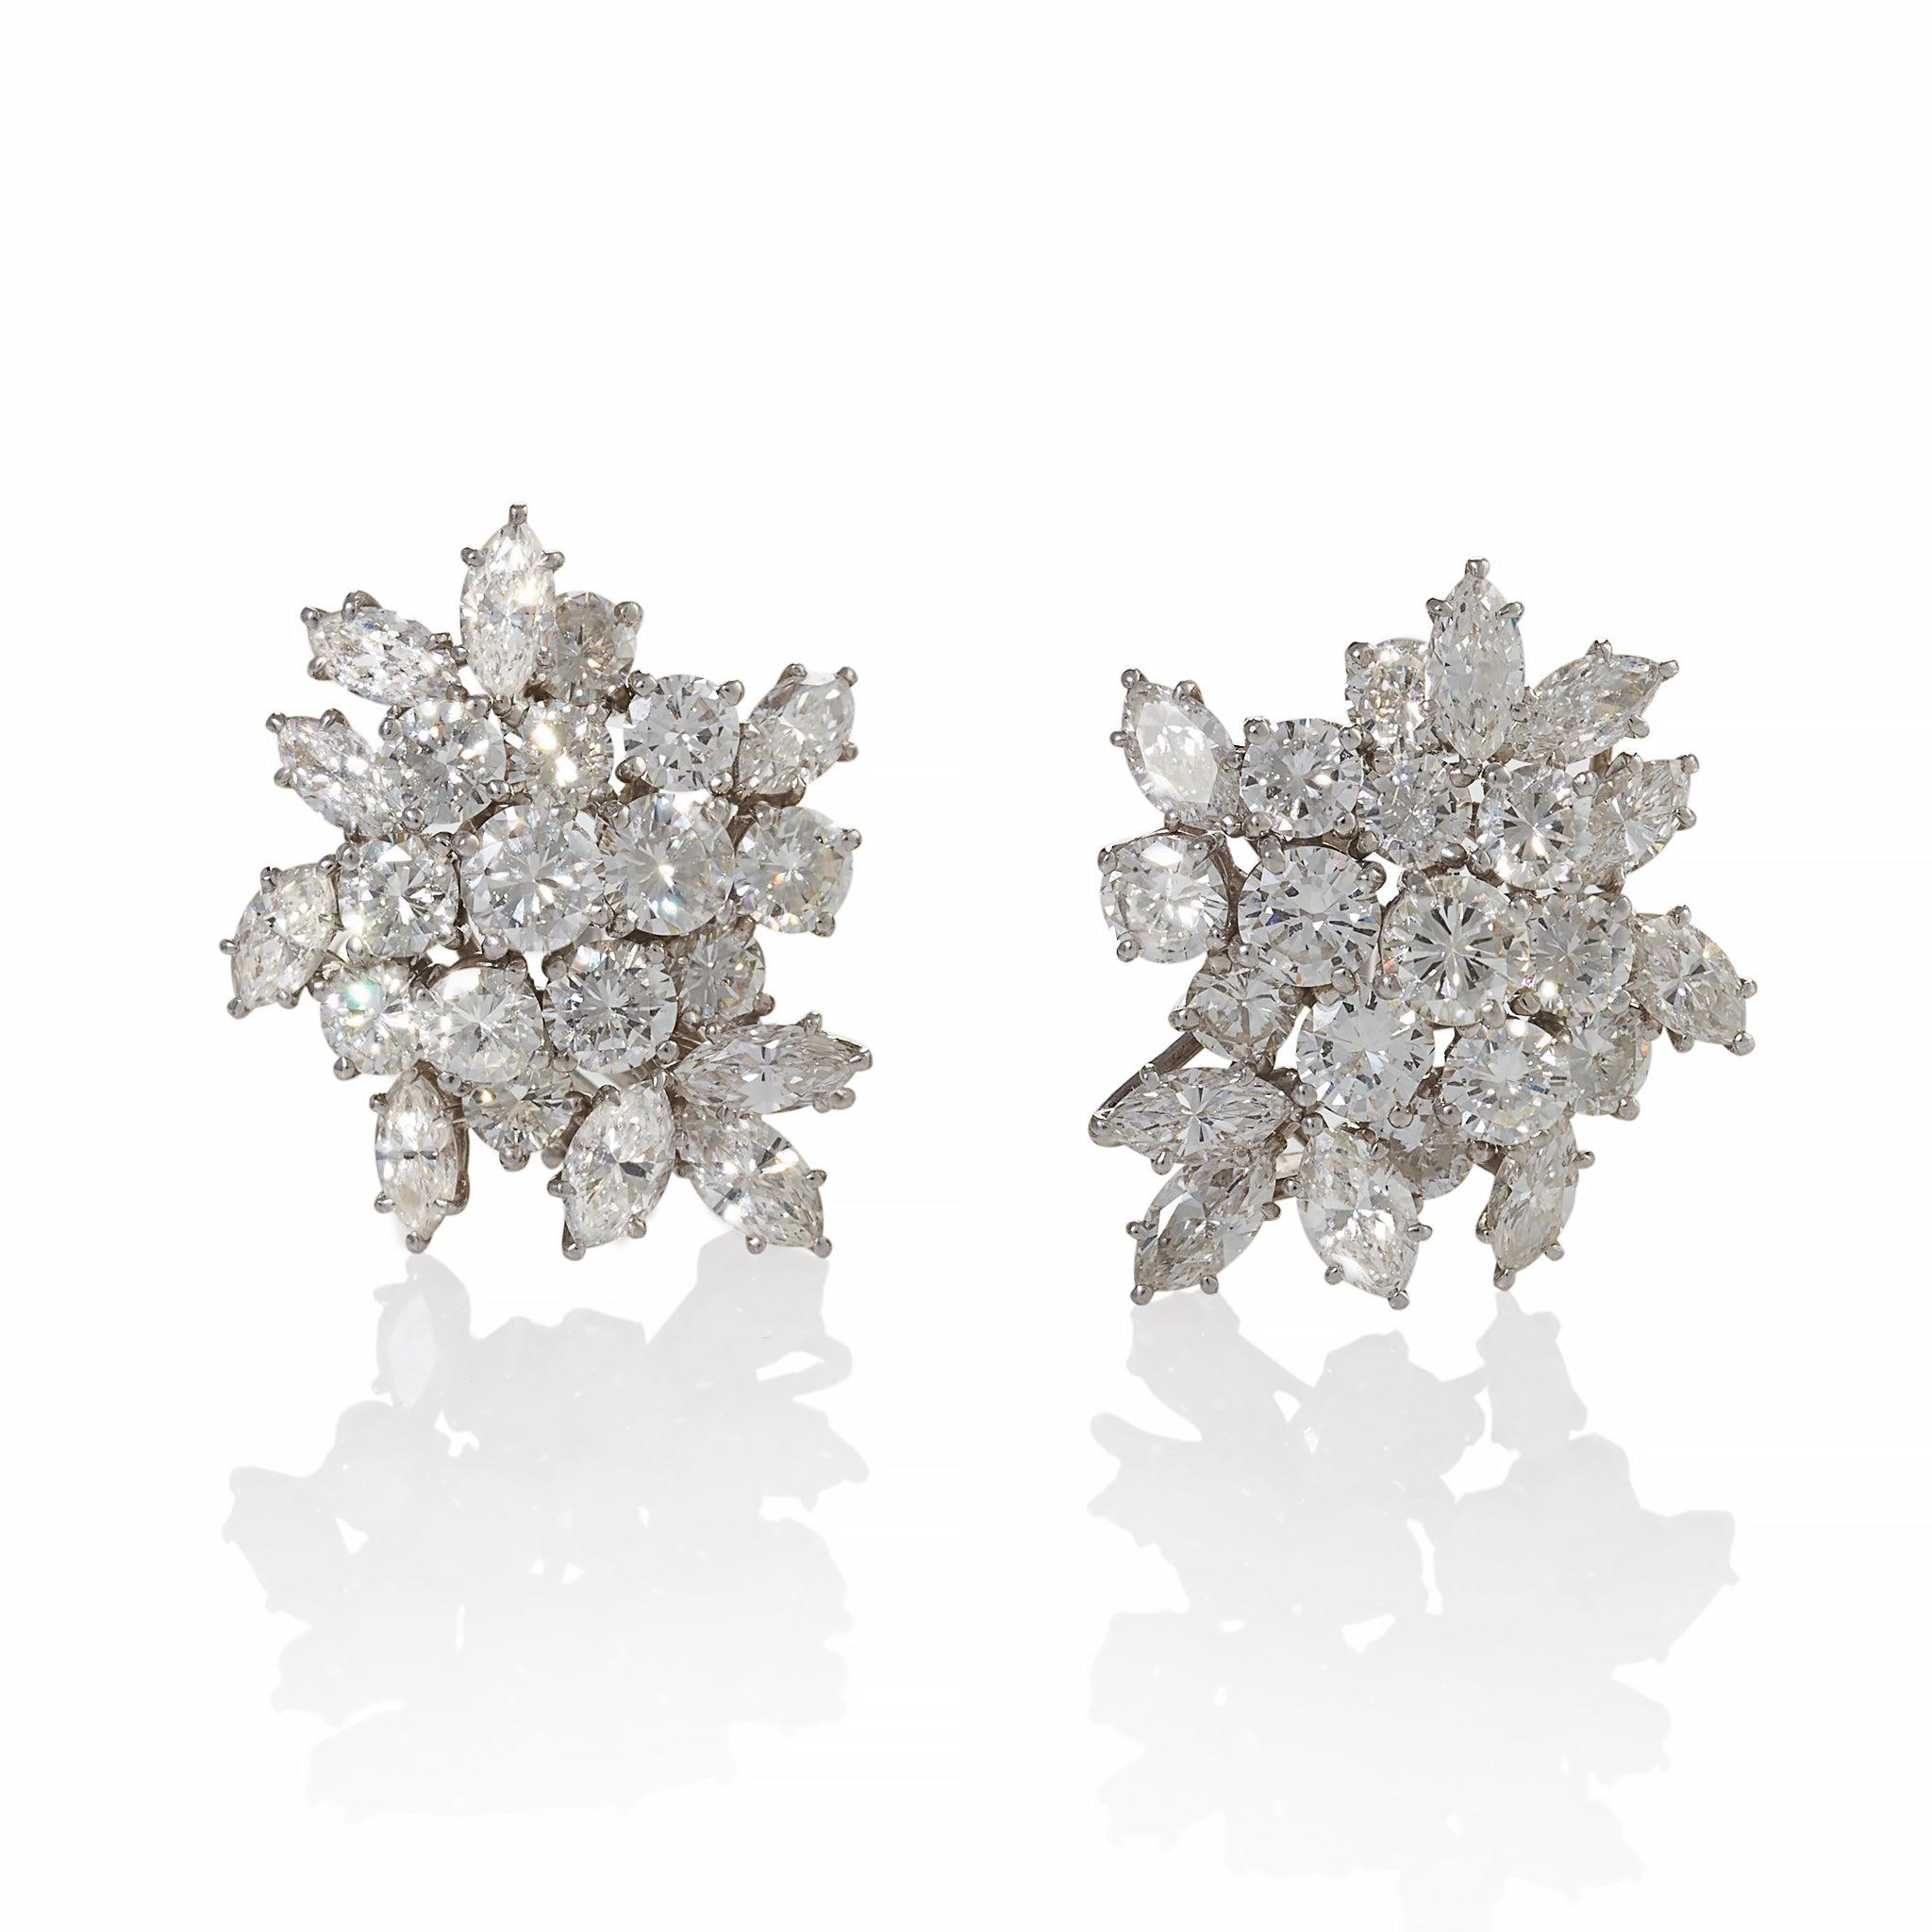 Dating from the 1950s-1960s, these platinum day/night clip pendant earrings are set with over 30 carats of diamonds. The abstract high relief cluster tops, set with approximately 7.10 carats of round brilliant-cut diamonds, suspend detachable